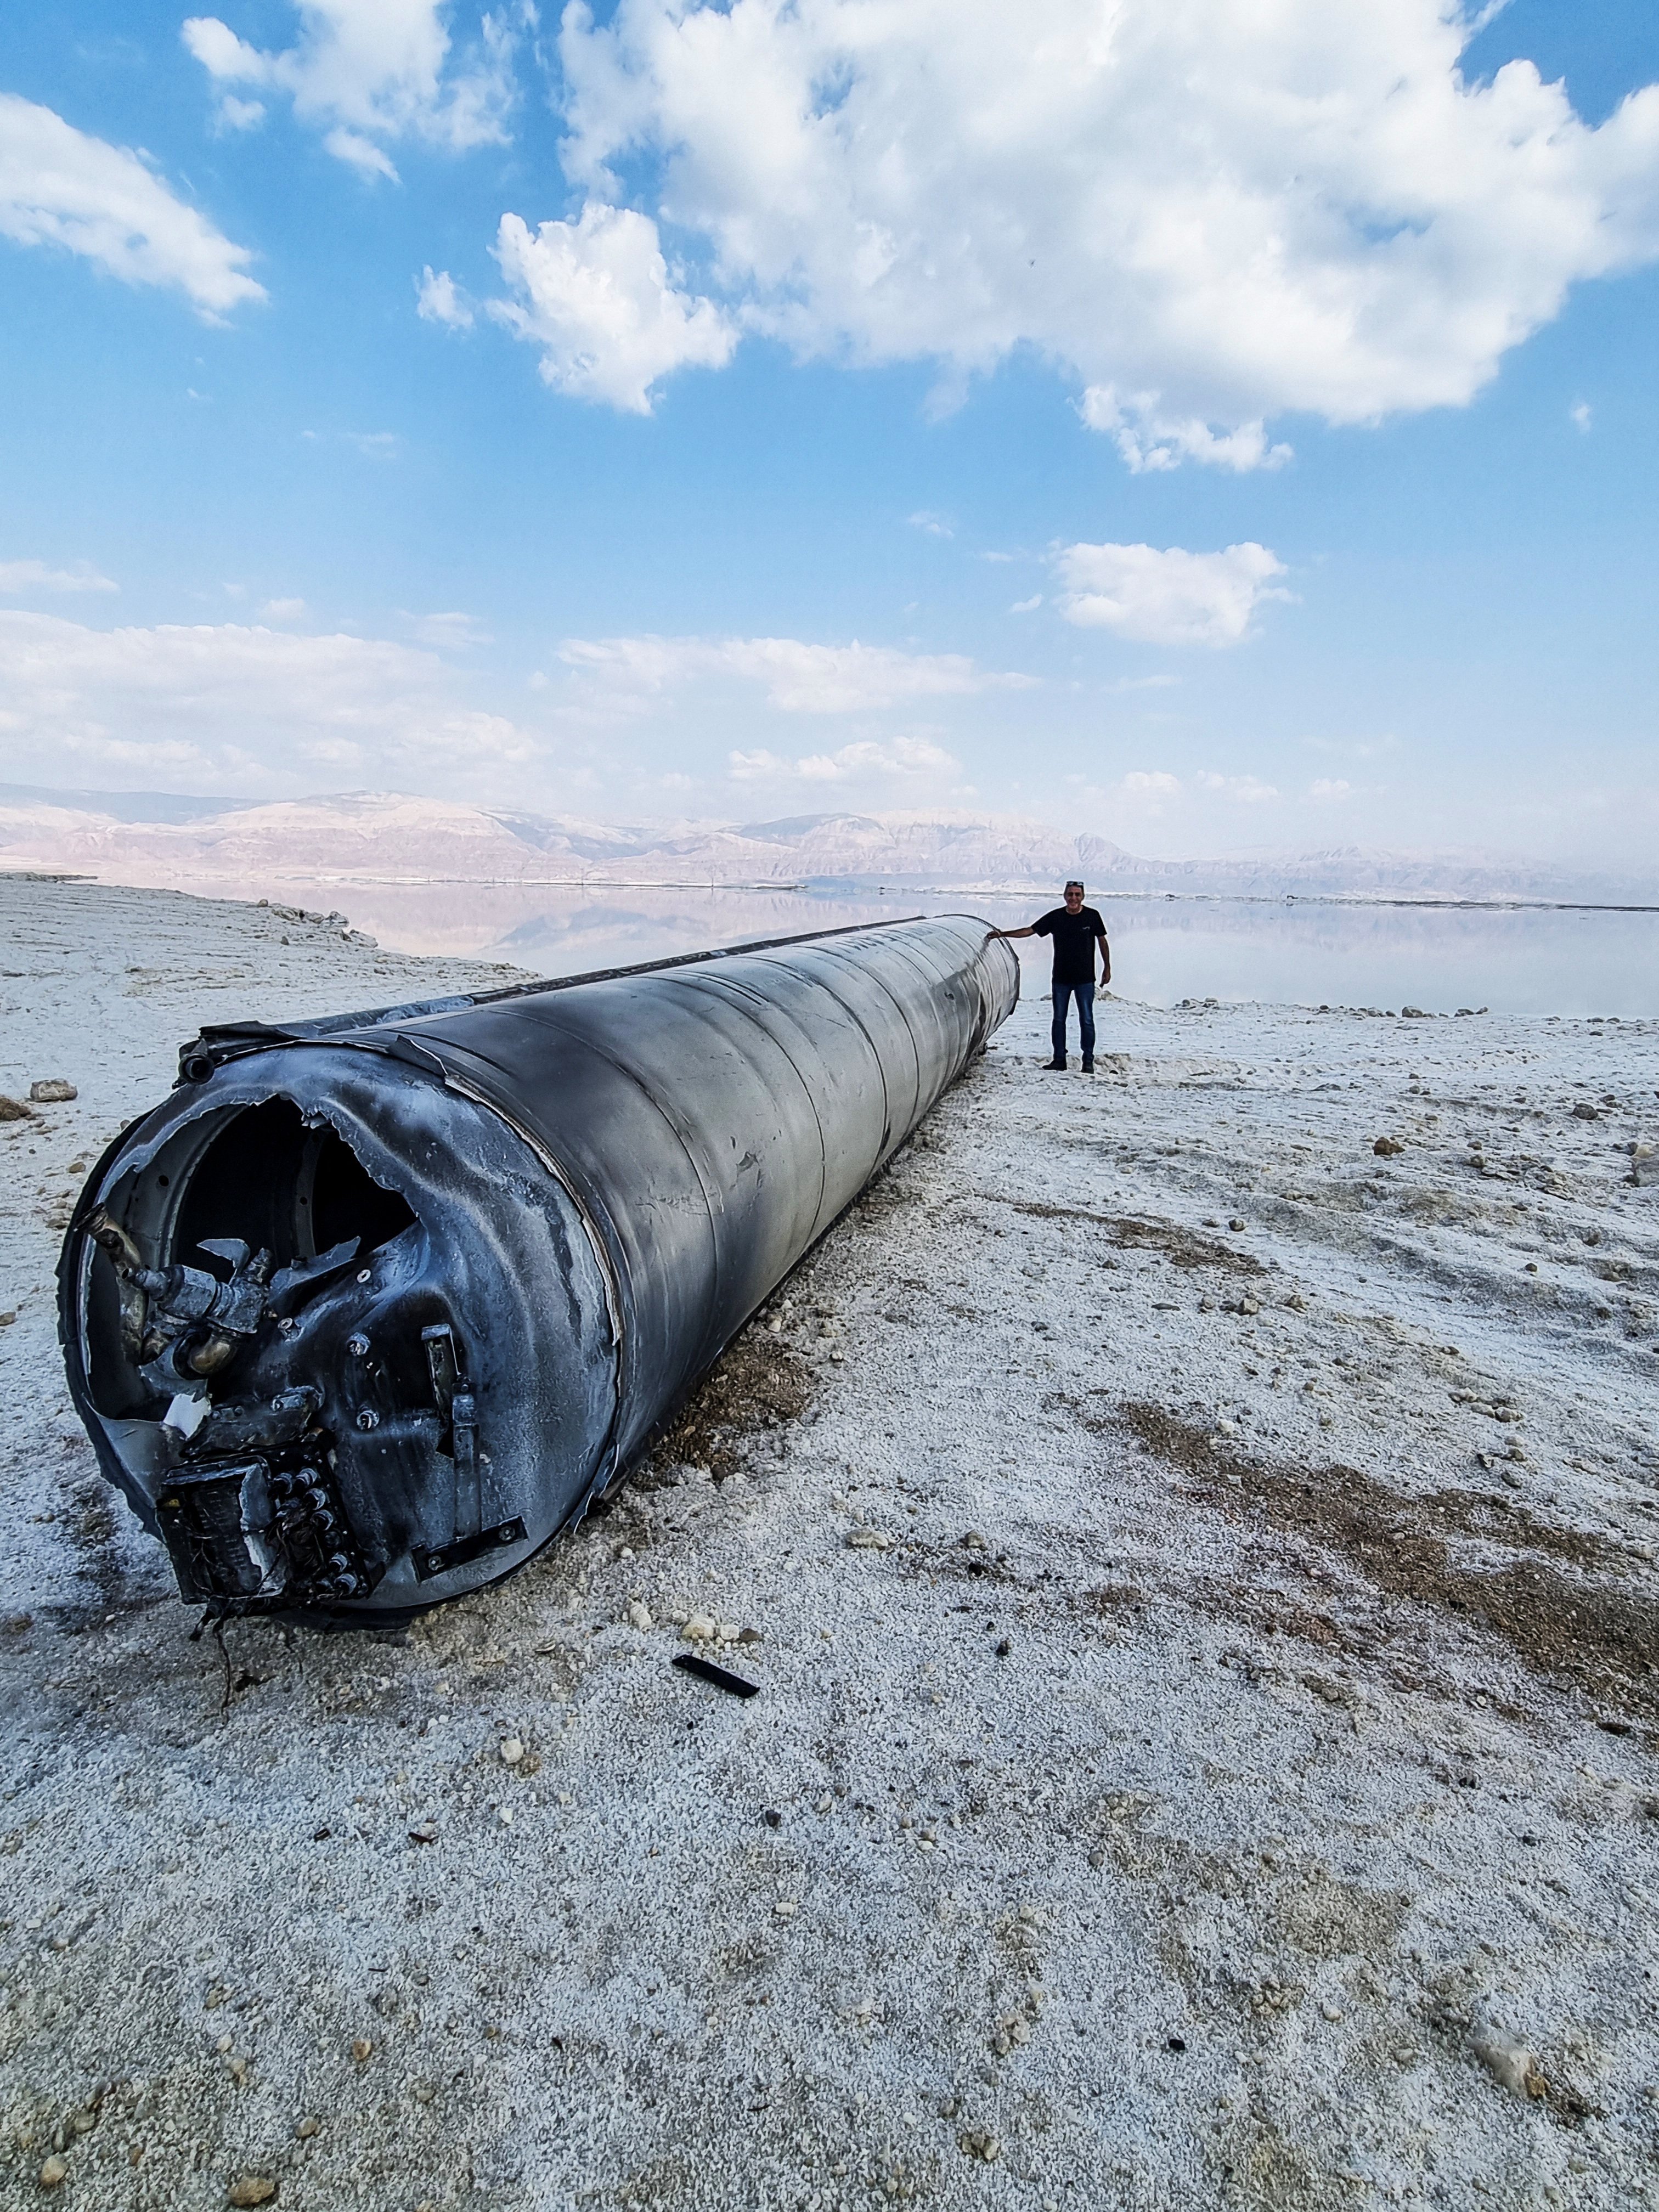 A ballistic missile on the shore of the Dead Sea, after Iran launched drones and missiles towards Israel. Photo: Reuters